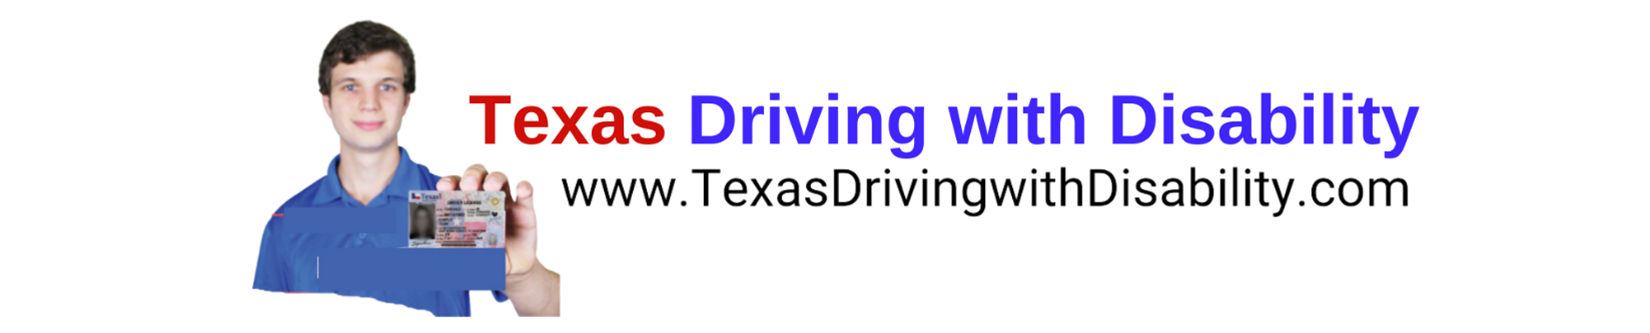 Texas Driving with Disability logo with Samuel Allen holding a driver license